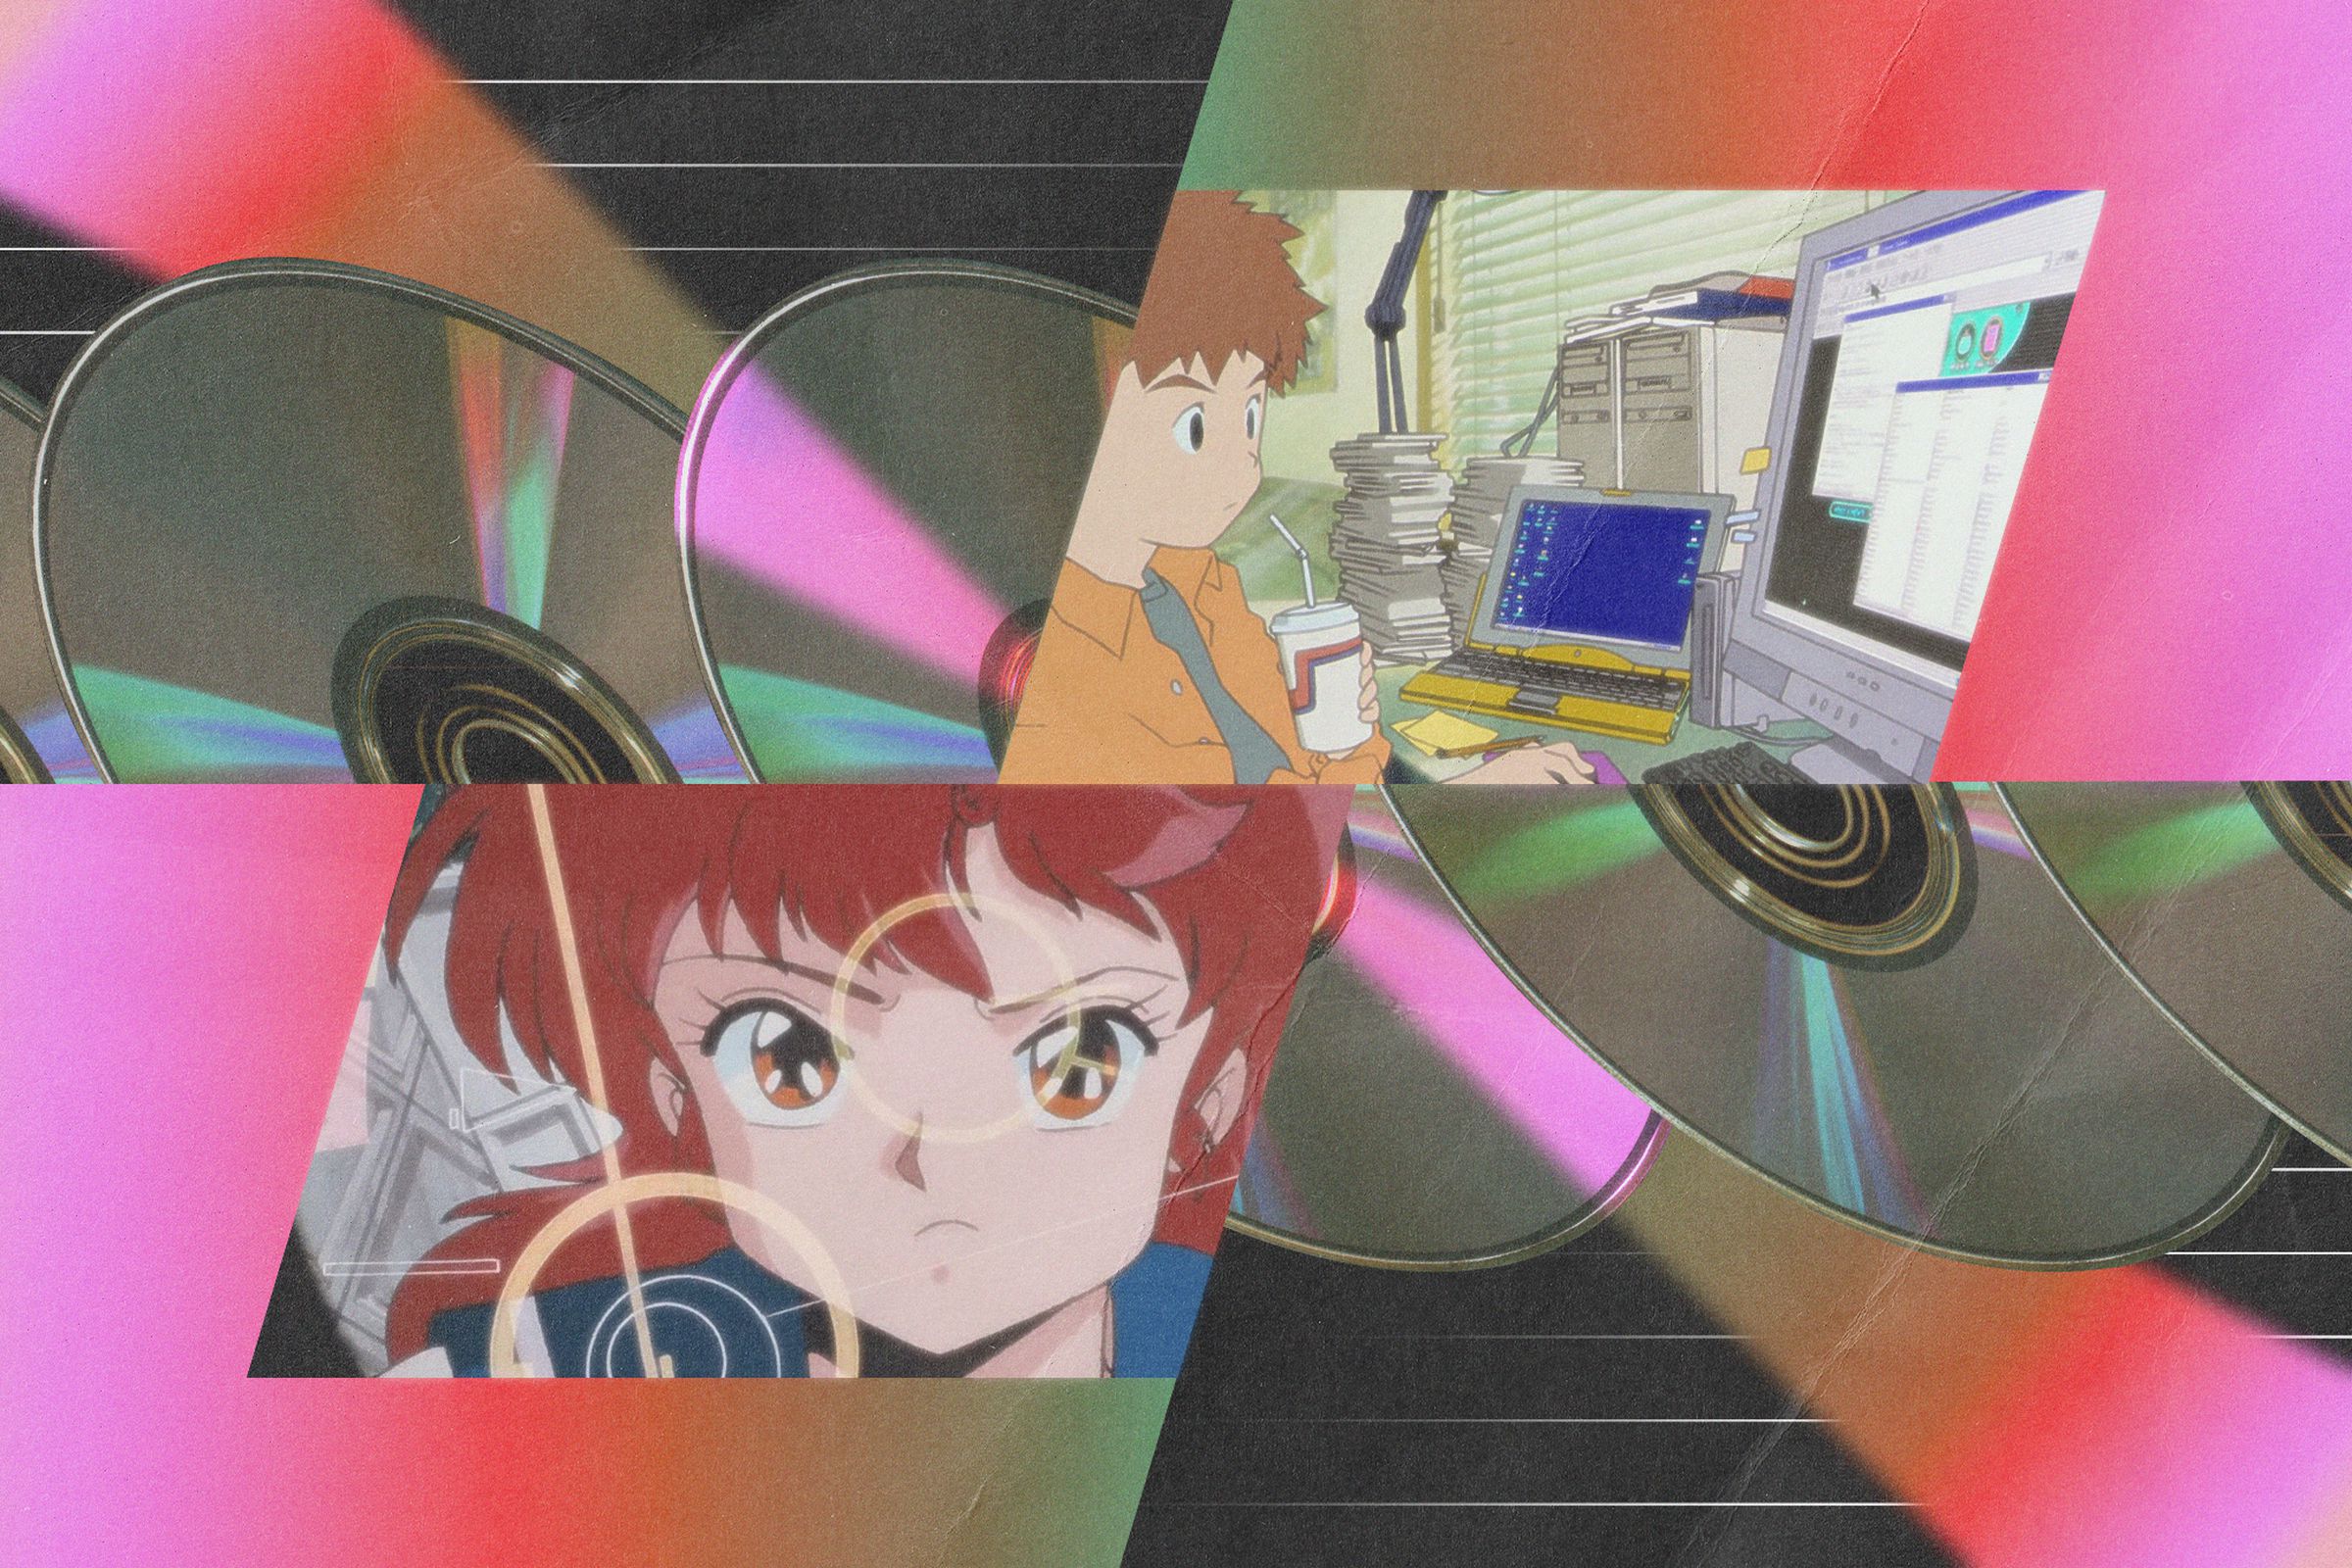 Photo collage featuring screenshots from two animes licensed through Discotek.